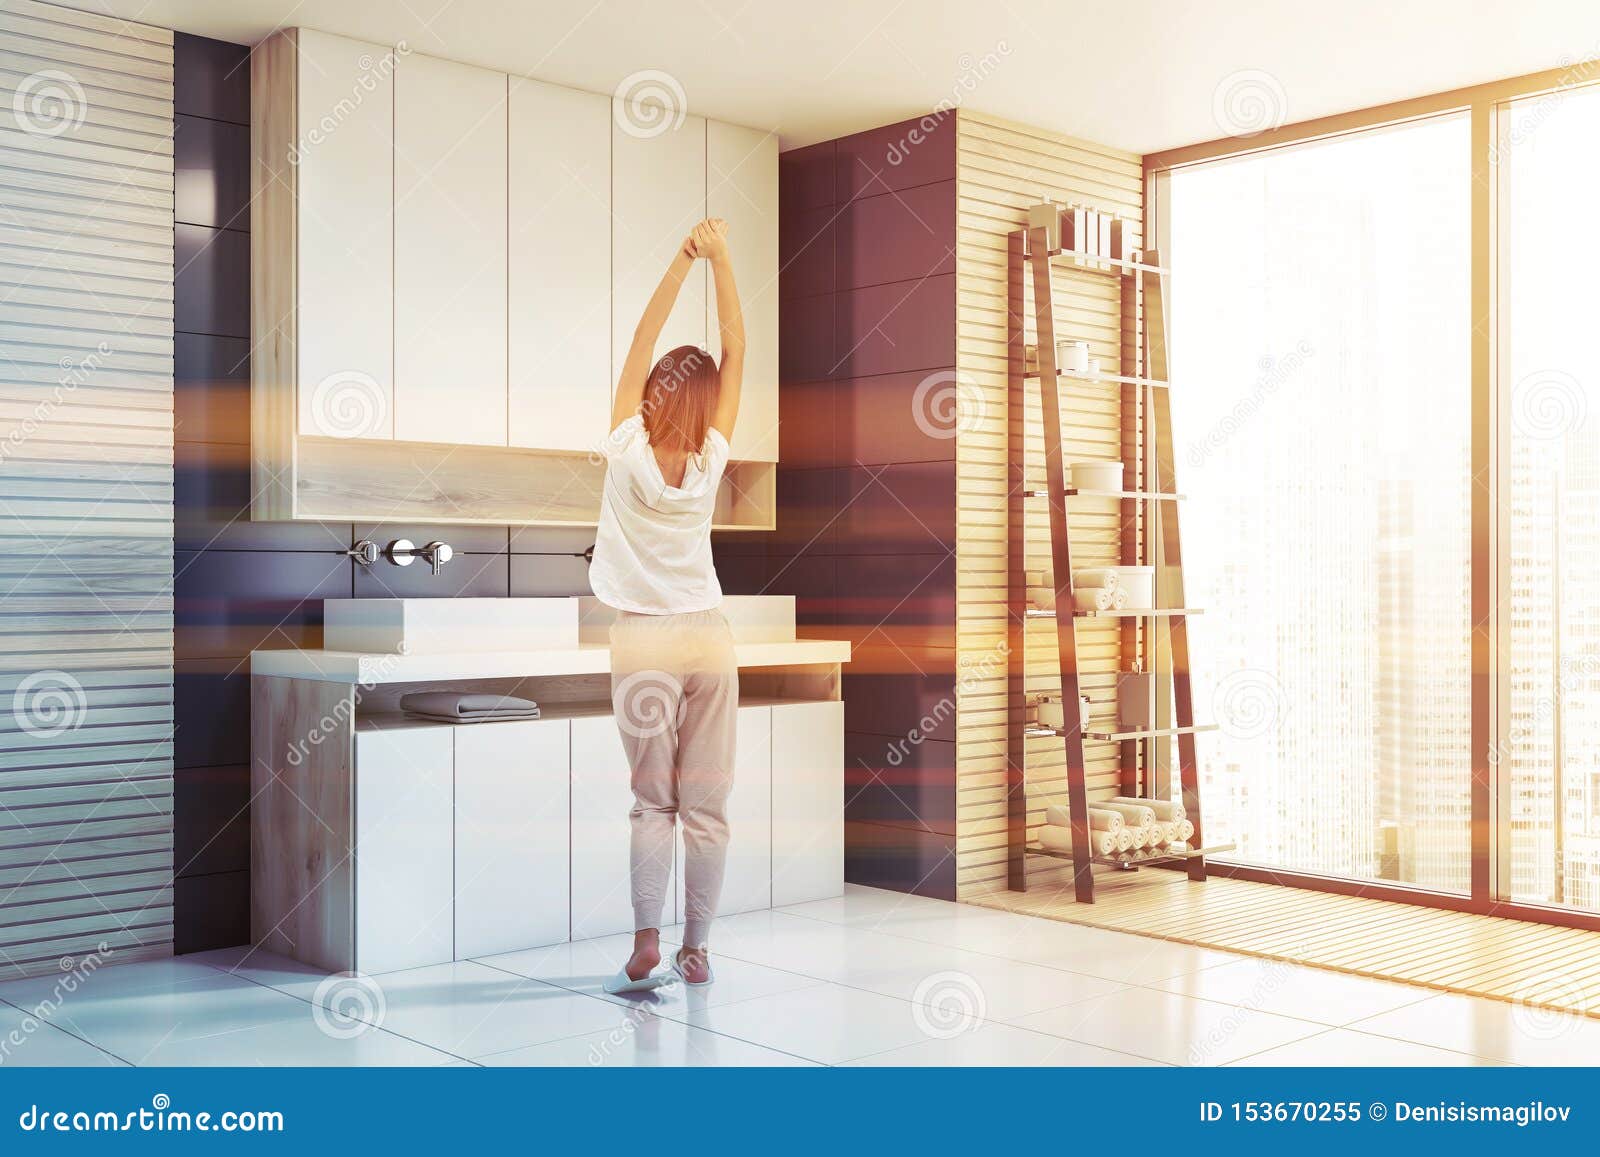 Woman In Blue Tile Bathroom With Sink Stock Image Image Of